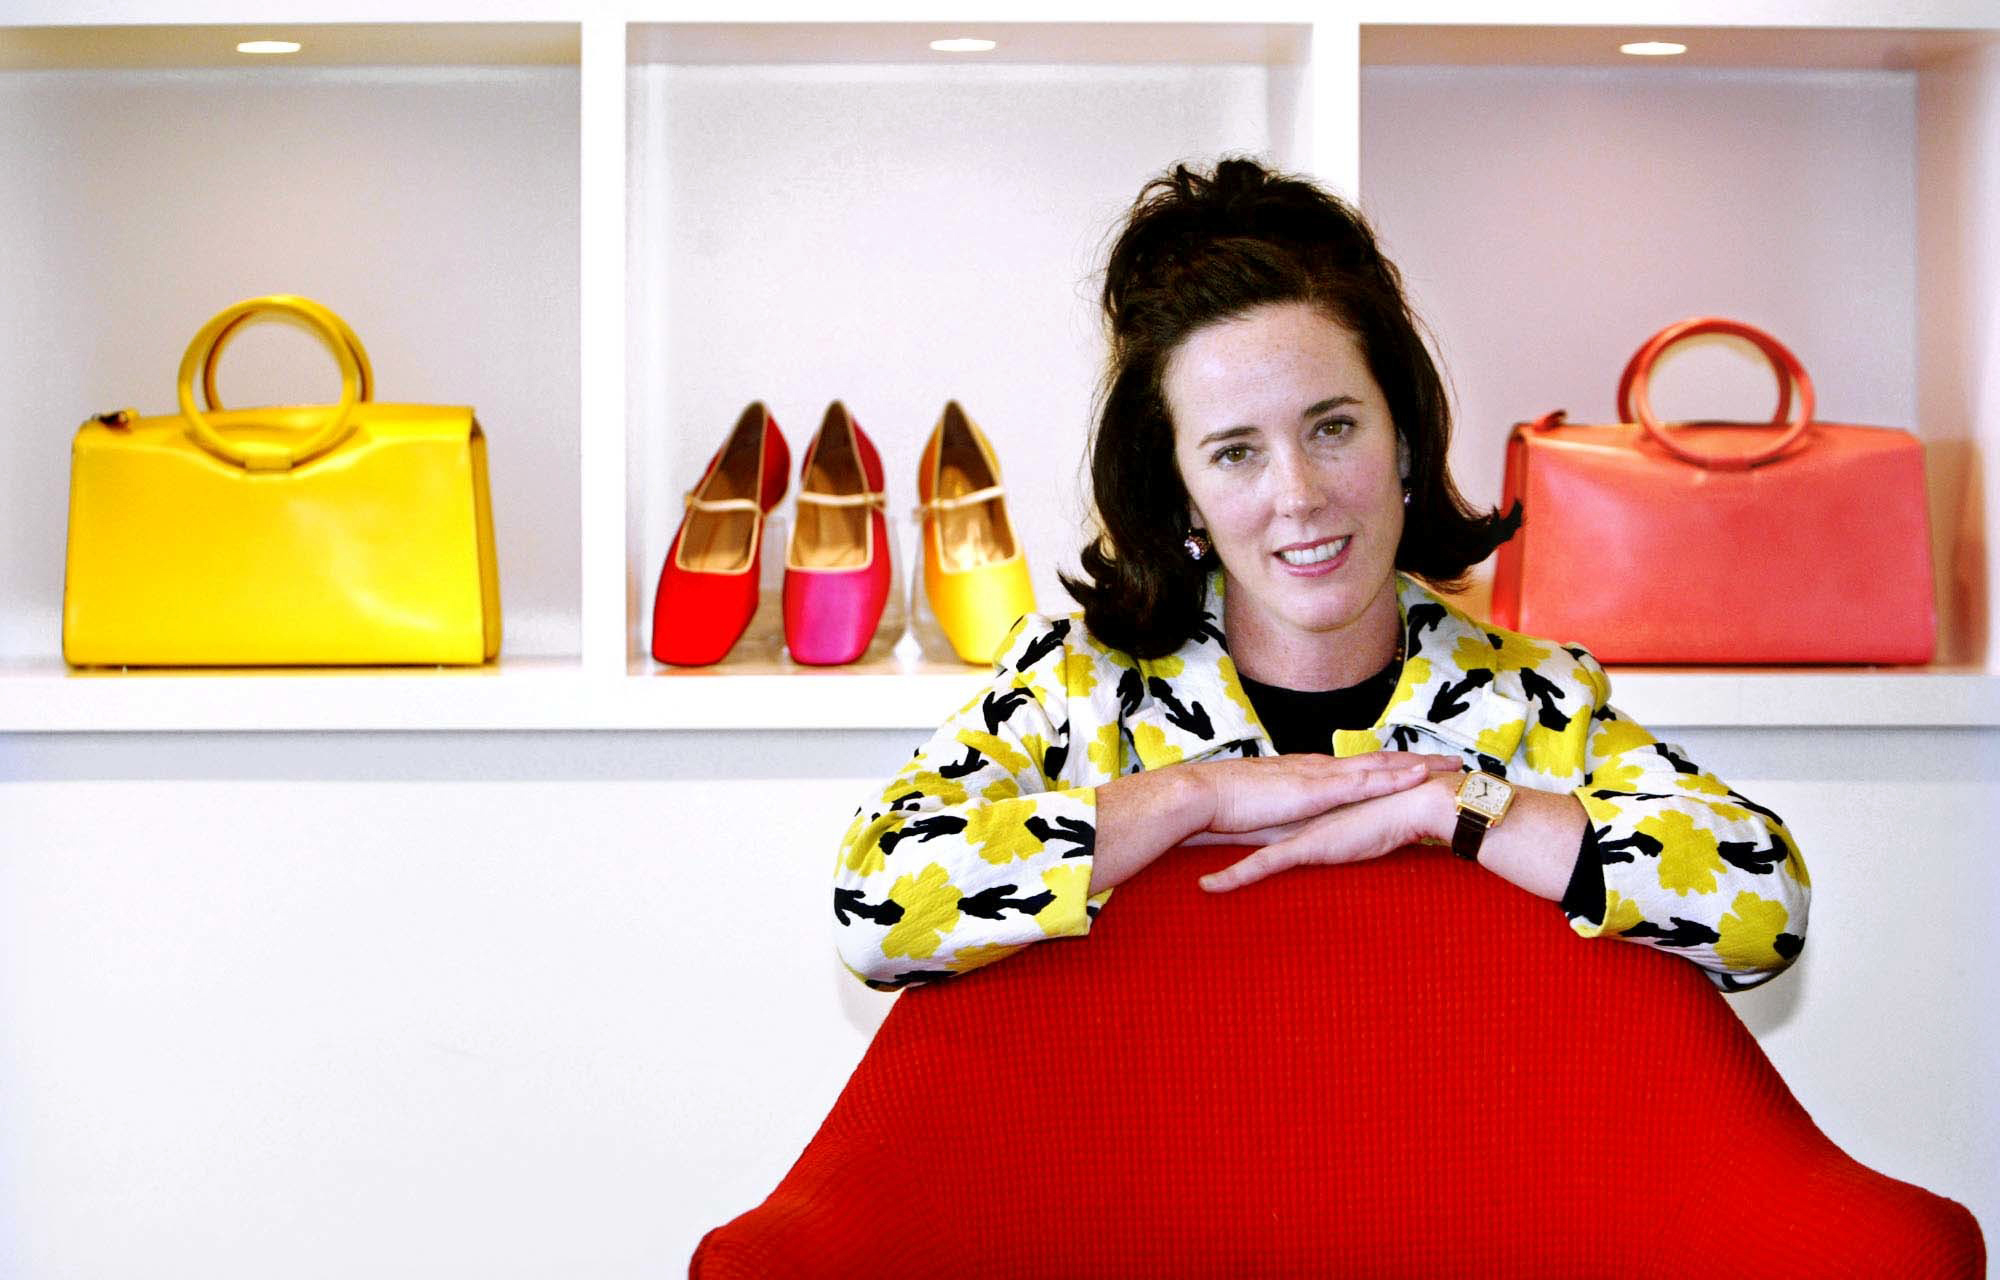 PHOTO: In this May 13, 2004 file photo, designer Kate Spade poses with handbags and shoes from her next collection in New York.